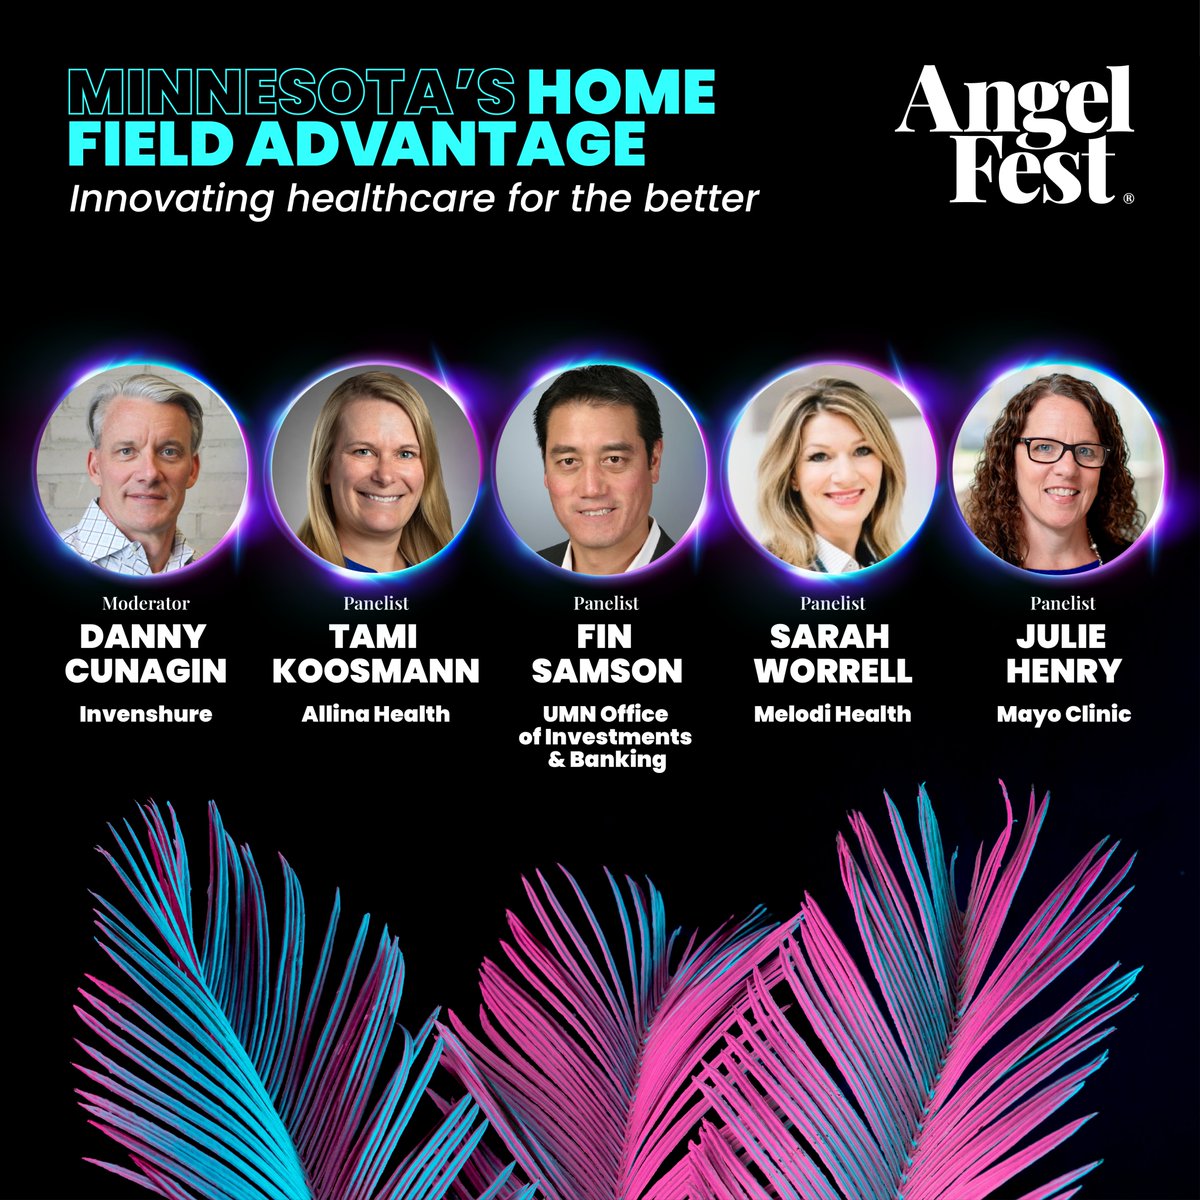 Julie Henry, business development chair for @MayoClinic, will be a panelist at #AngelFest2024 on May 2. The group will discuss investment in #MedTech and the advantages of #Minnesota as a home for startups. #Investment #Entrepreneurship #Startup @GrooveCap